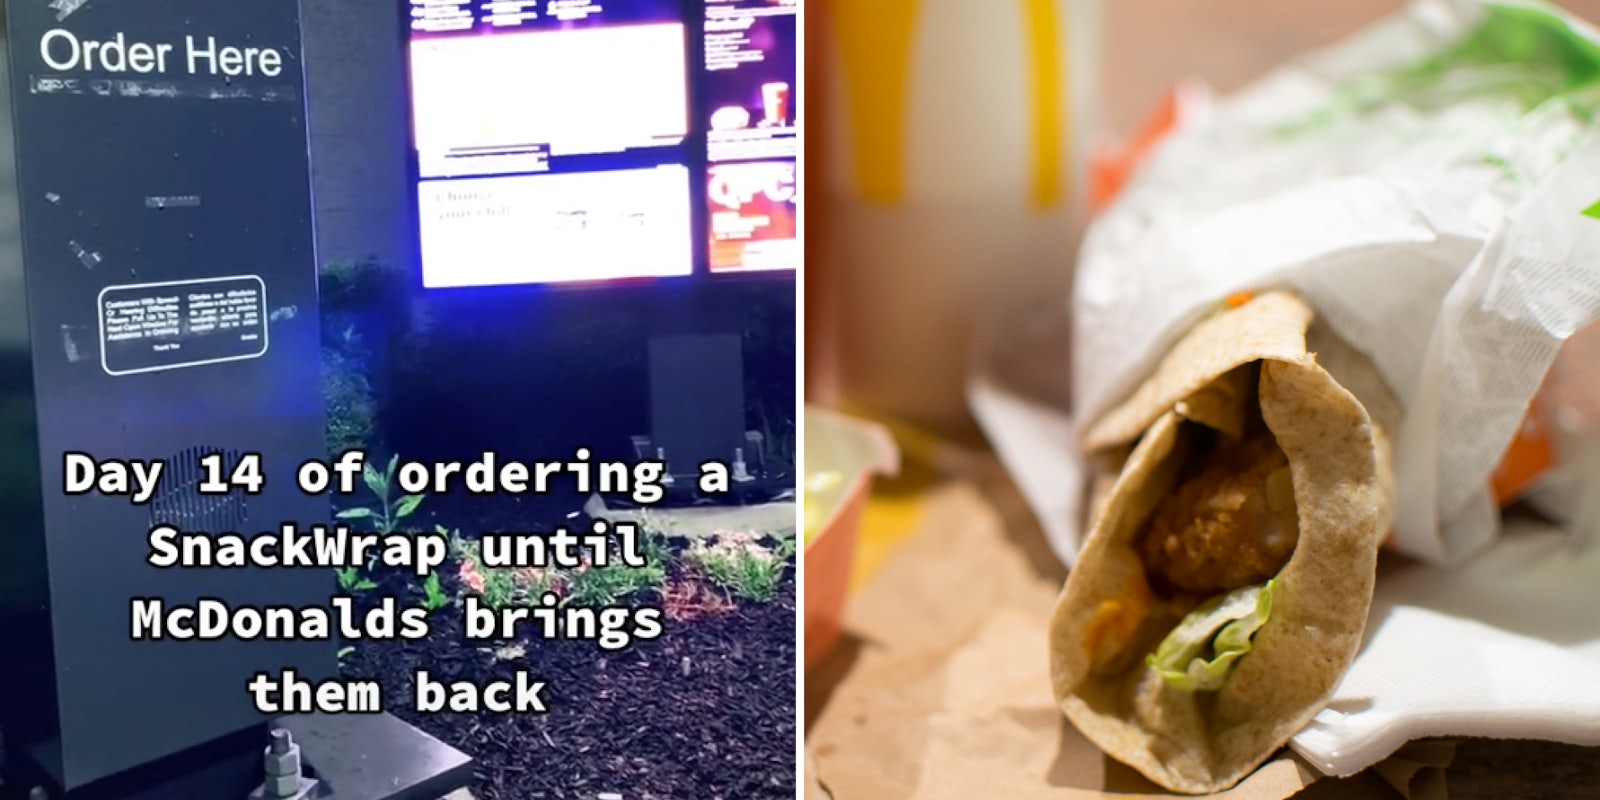 McDonald's drive thru speaker and screen caption 'Day 14 of ordering a SnackWrap until McDonalds brings them back' (l) McDonalds Chicken SnackWrap with McDonald's cup blurred behind (r)